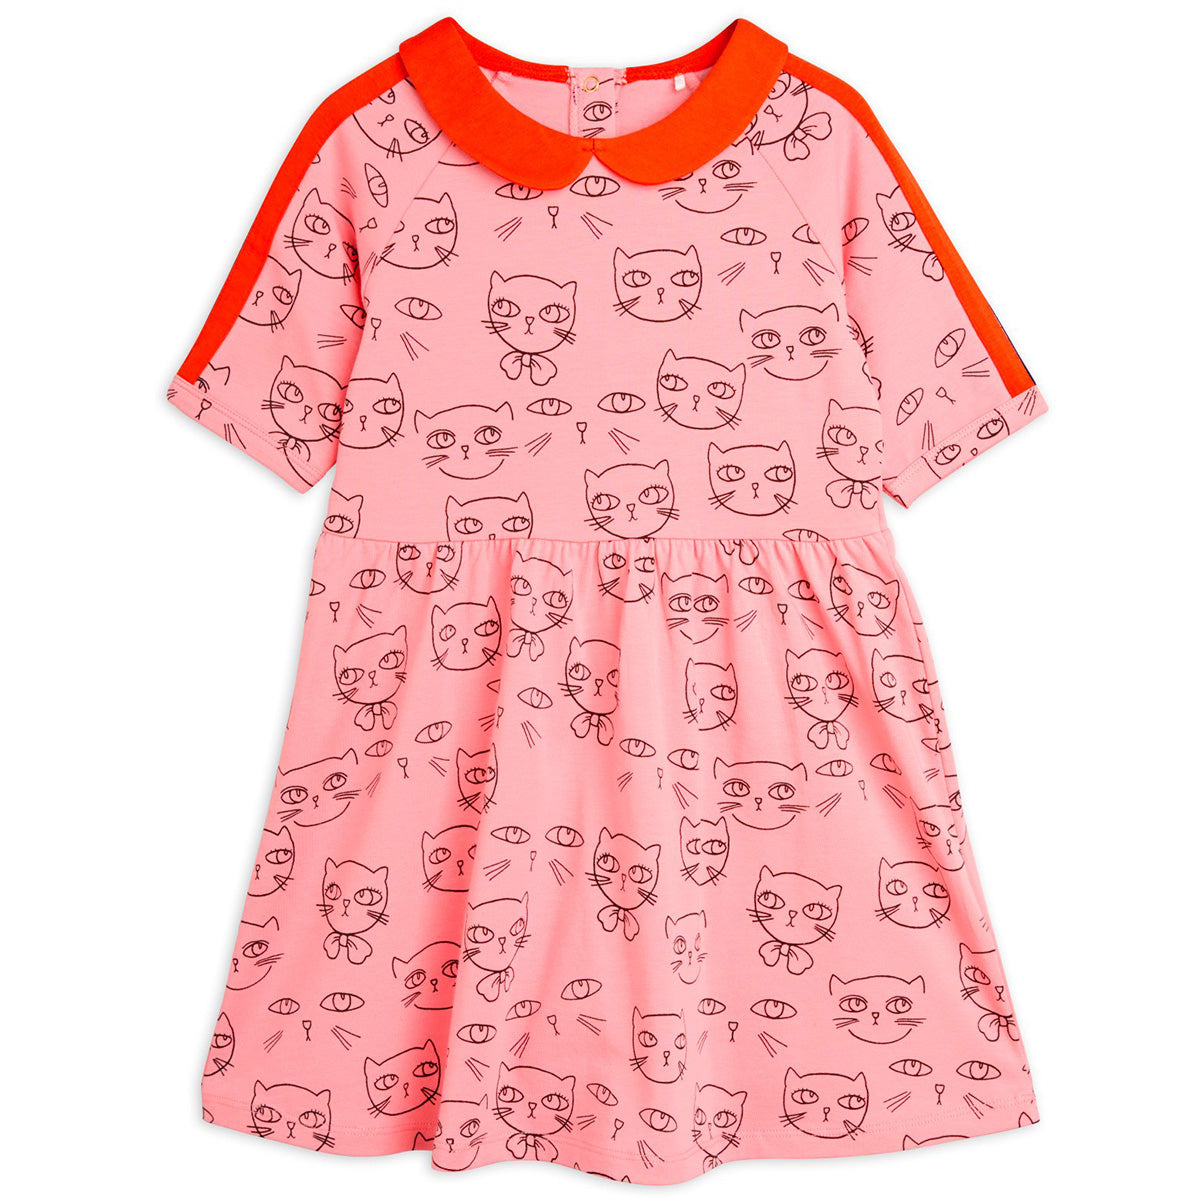 The Cathletes Dress from Mini Rodini. Dress made from GOTS certified organic cotton with a hint of stretch